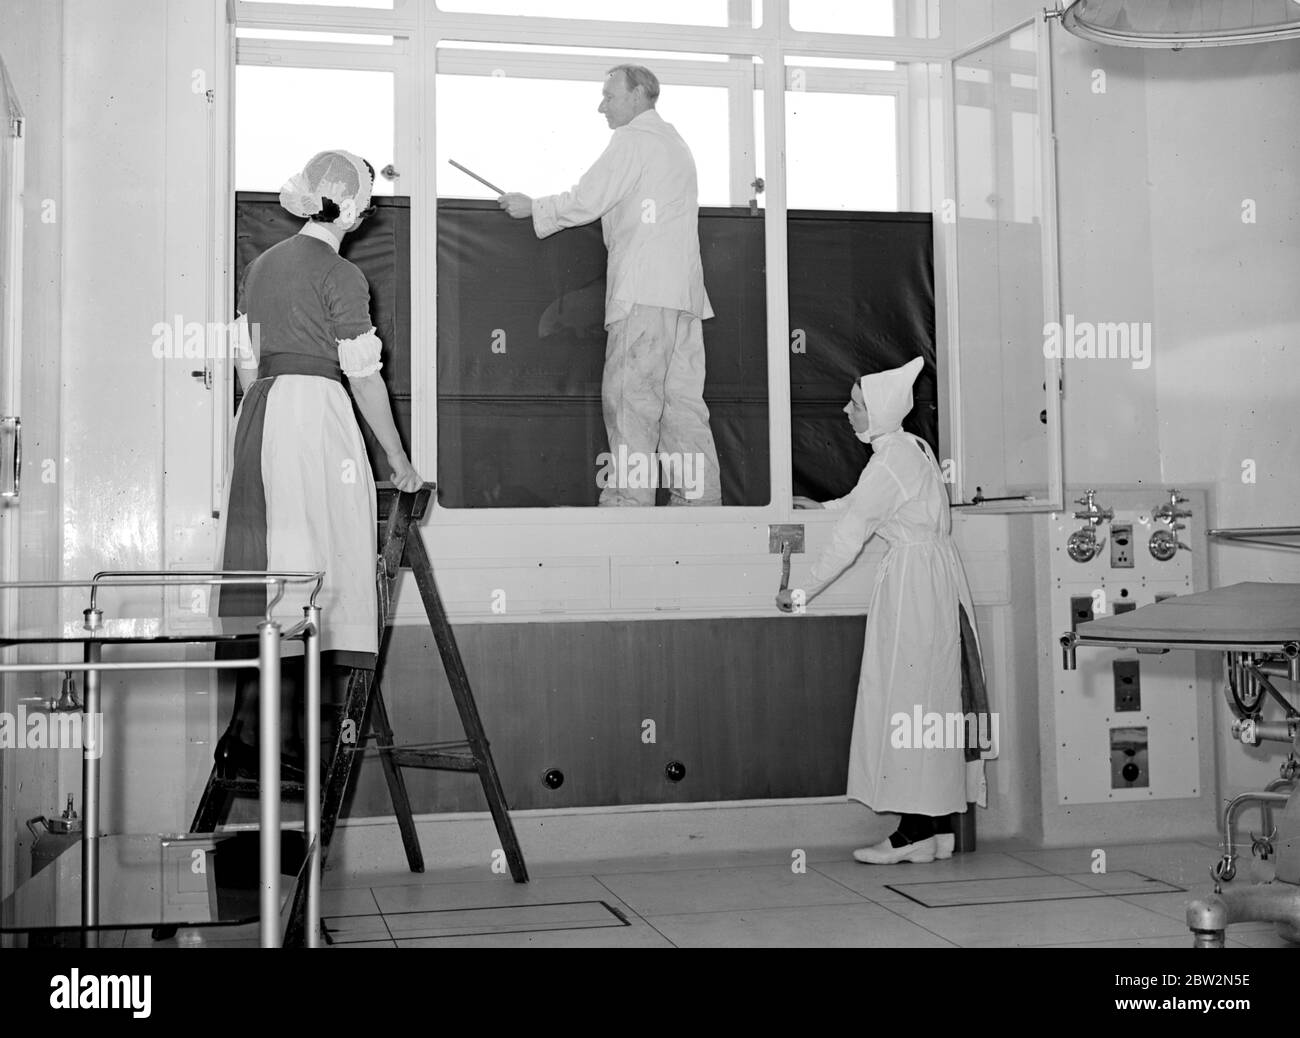 The Crisis, 1939. A.R.P. Precautions - darkening windows at Westminster Hospital.. 8 August 1939 Stock Photo